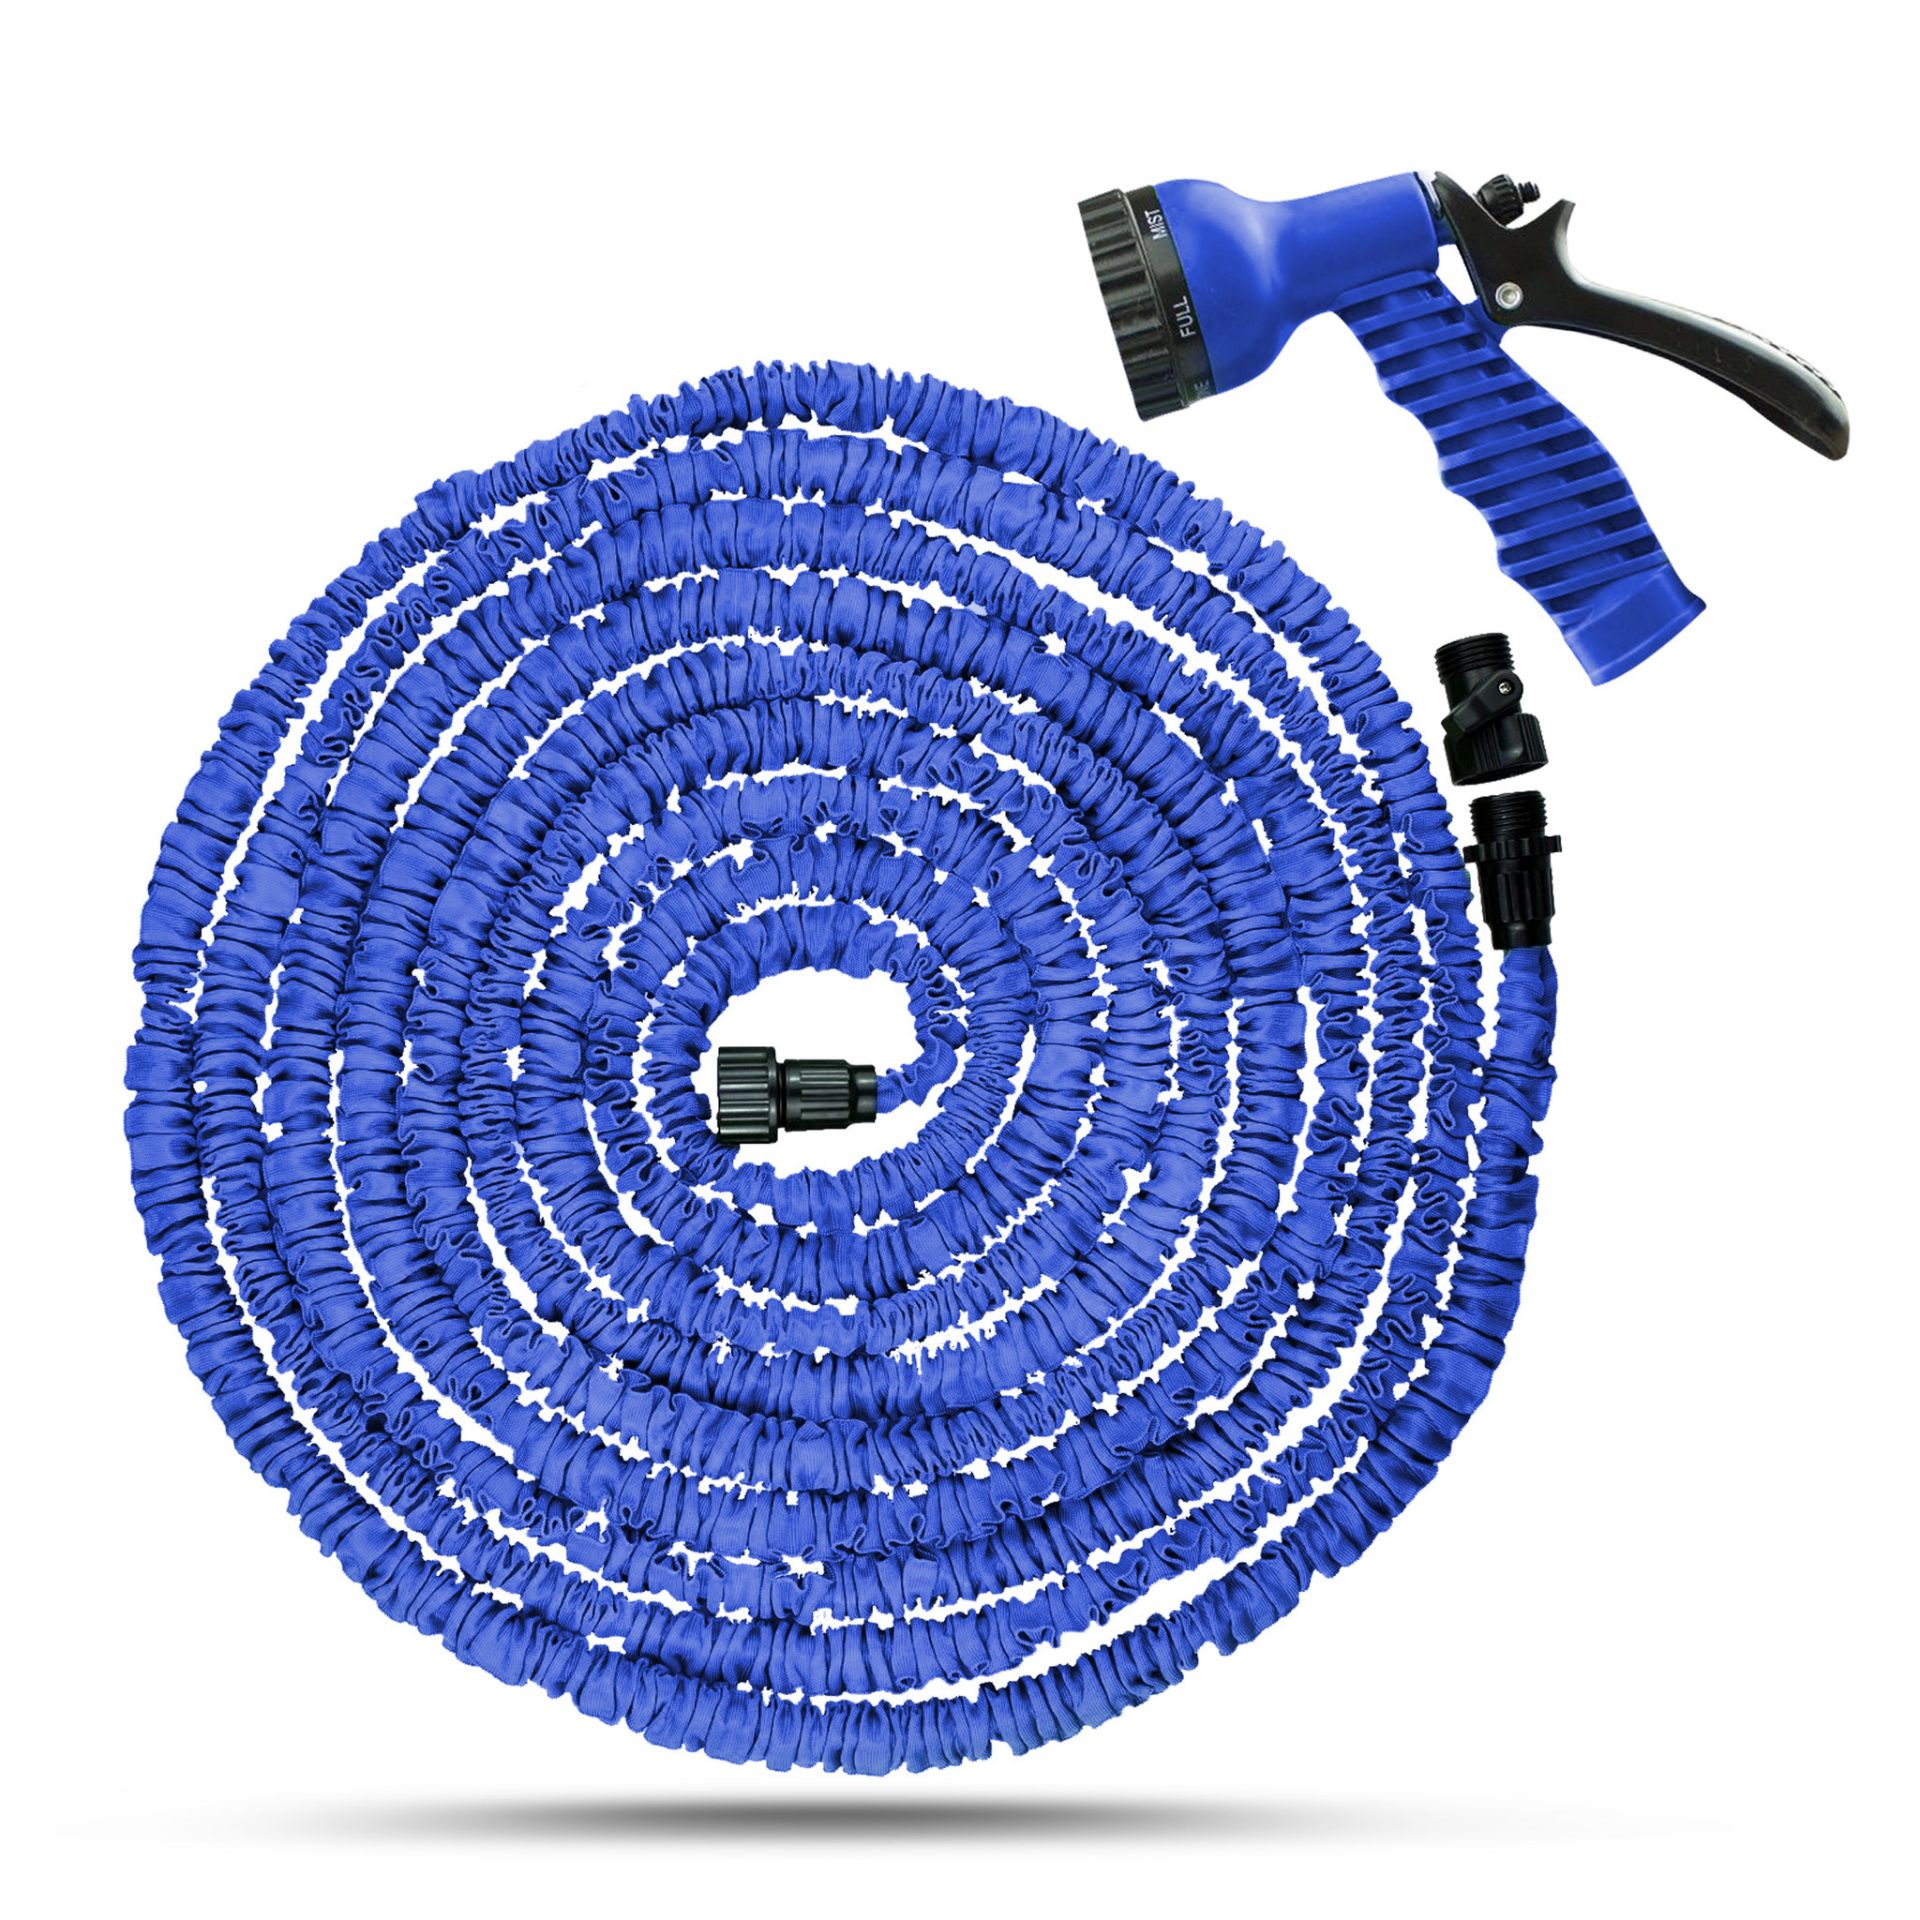 V Brand New 25 Foot Expandable Hose - Automatically Expands - Lightweight - Easily Stored